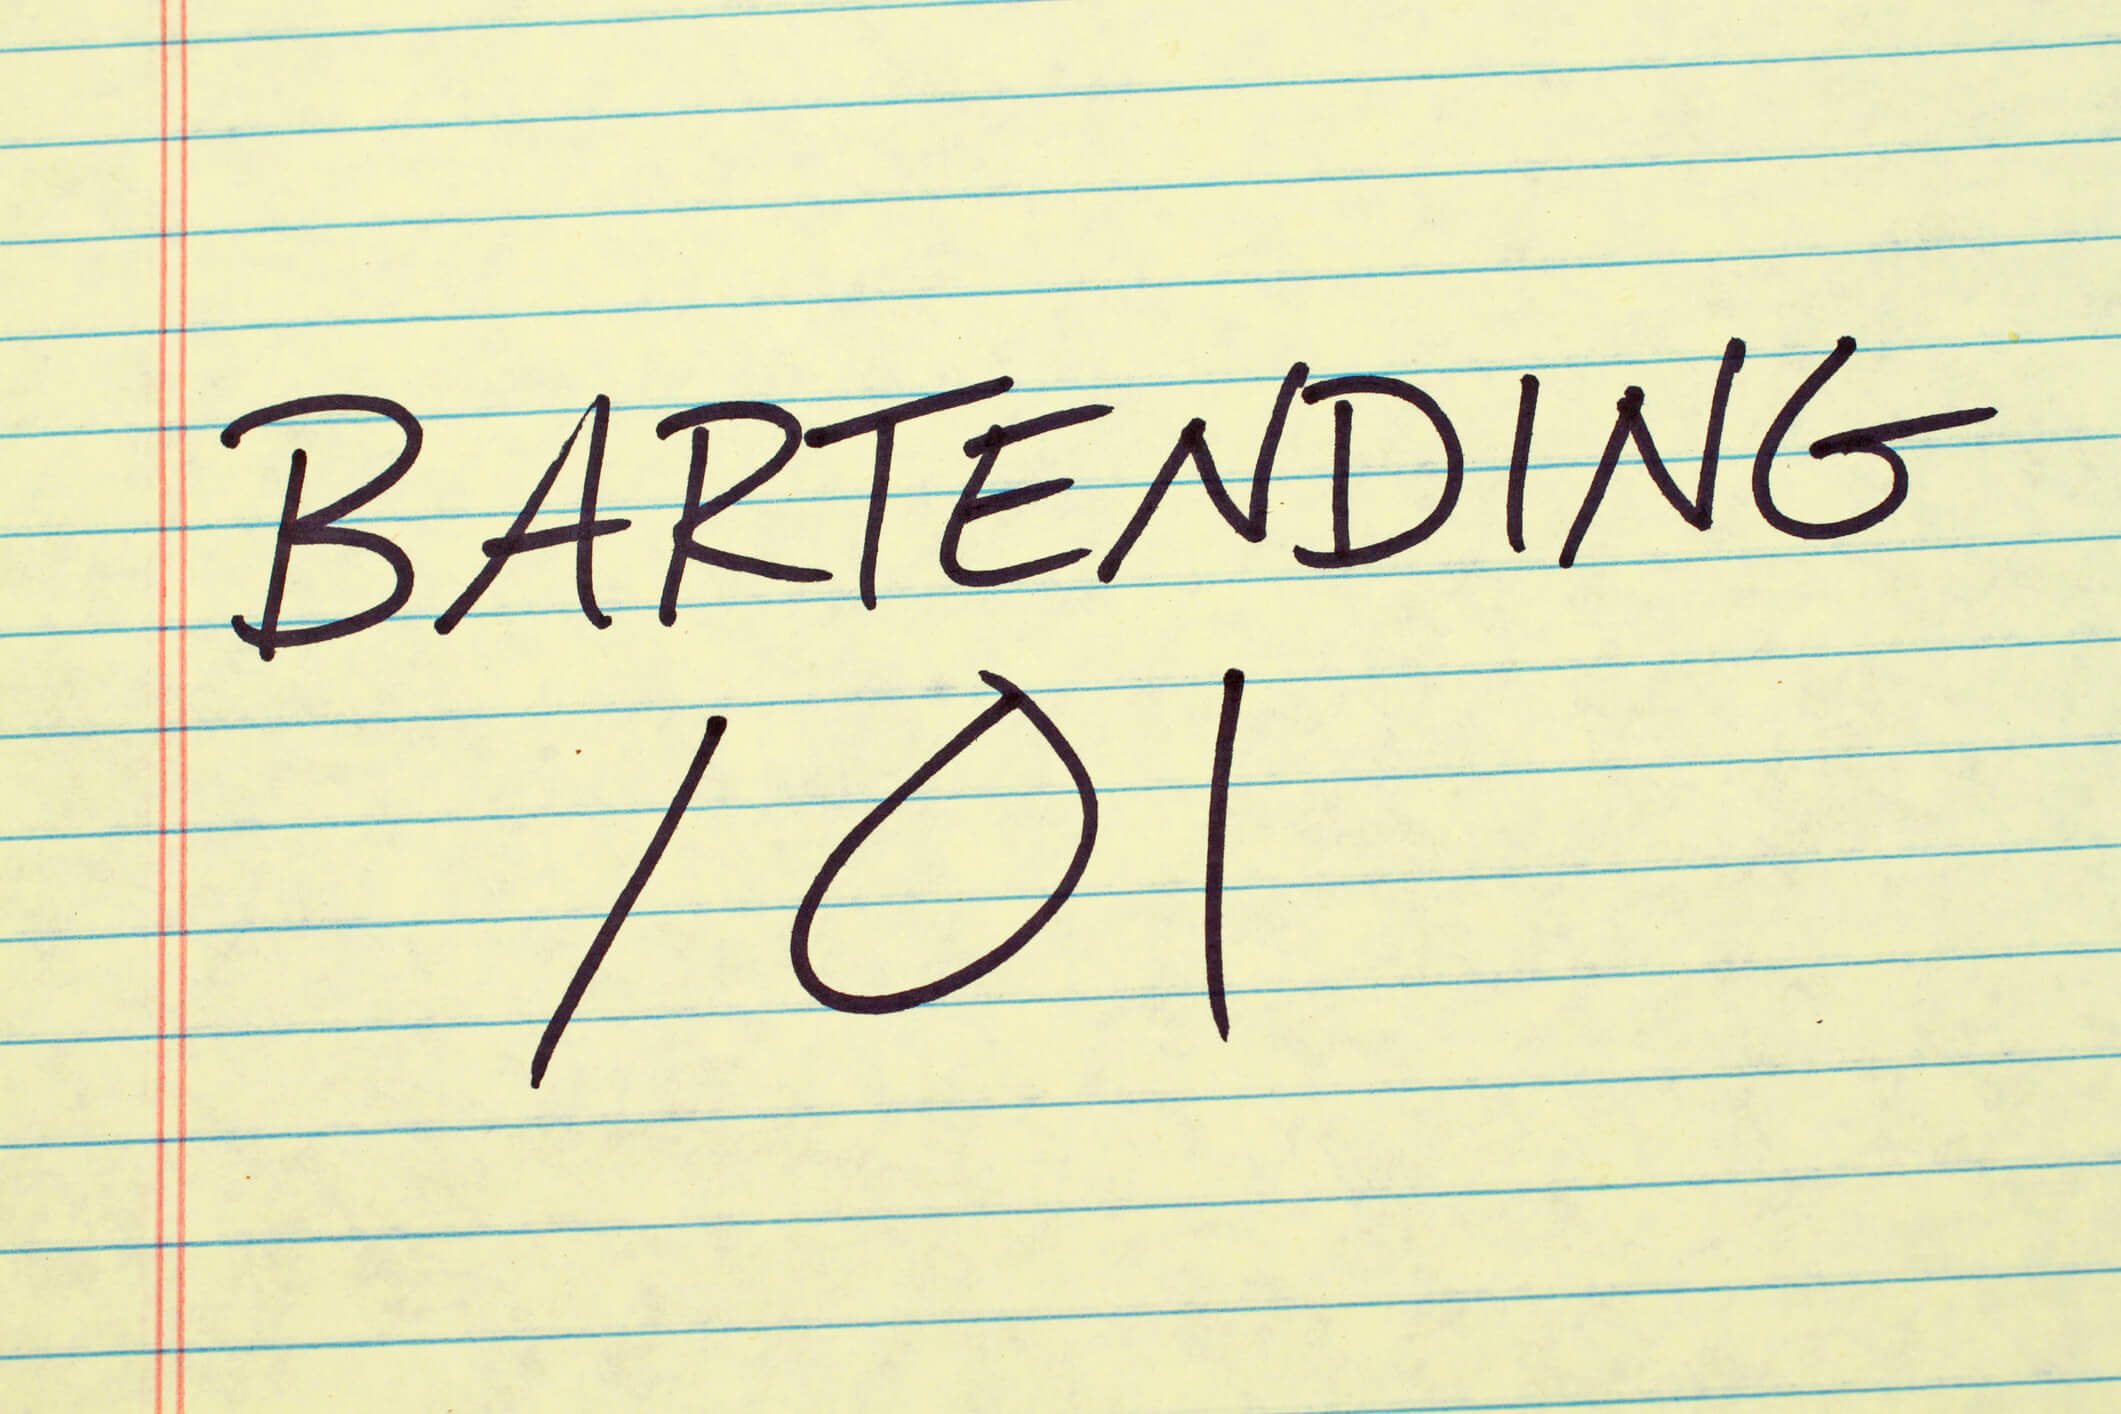 Bartending 101 college ruled paper